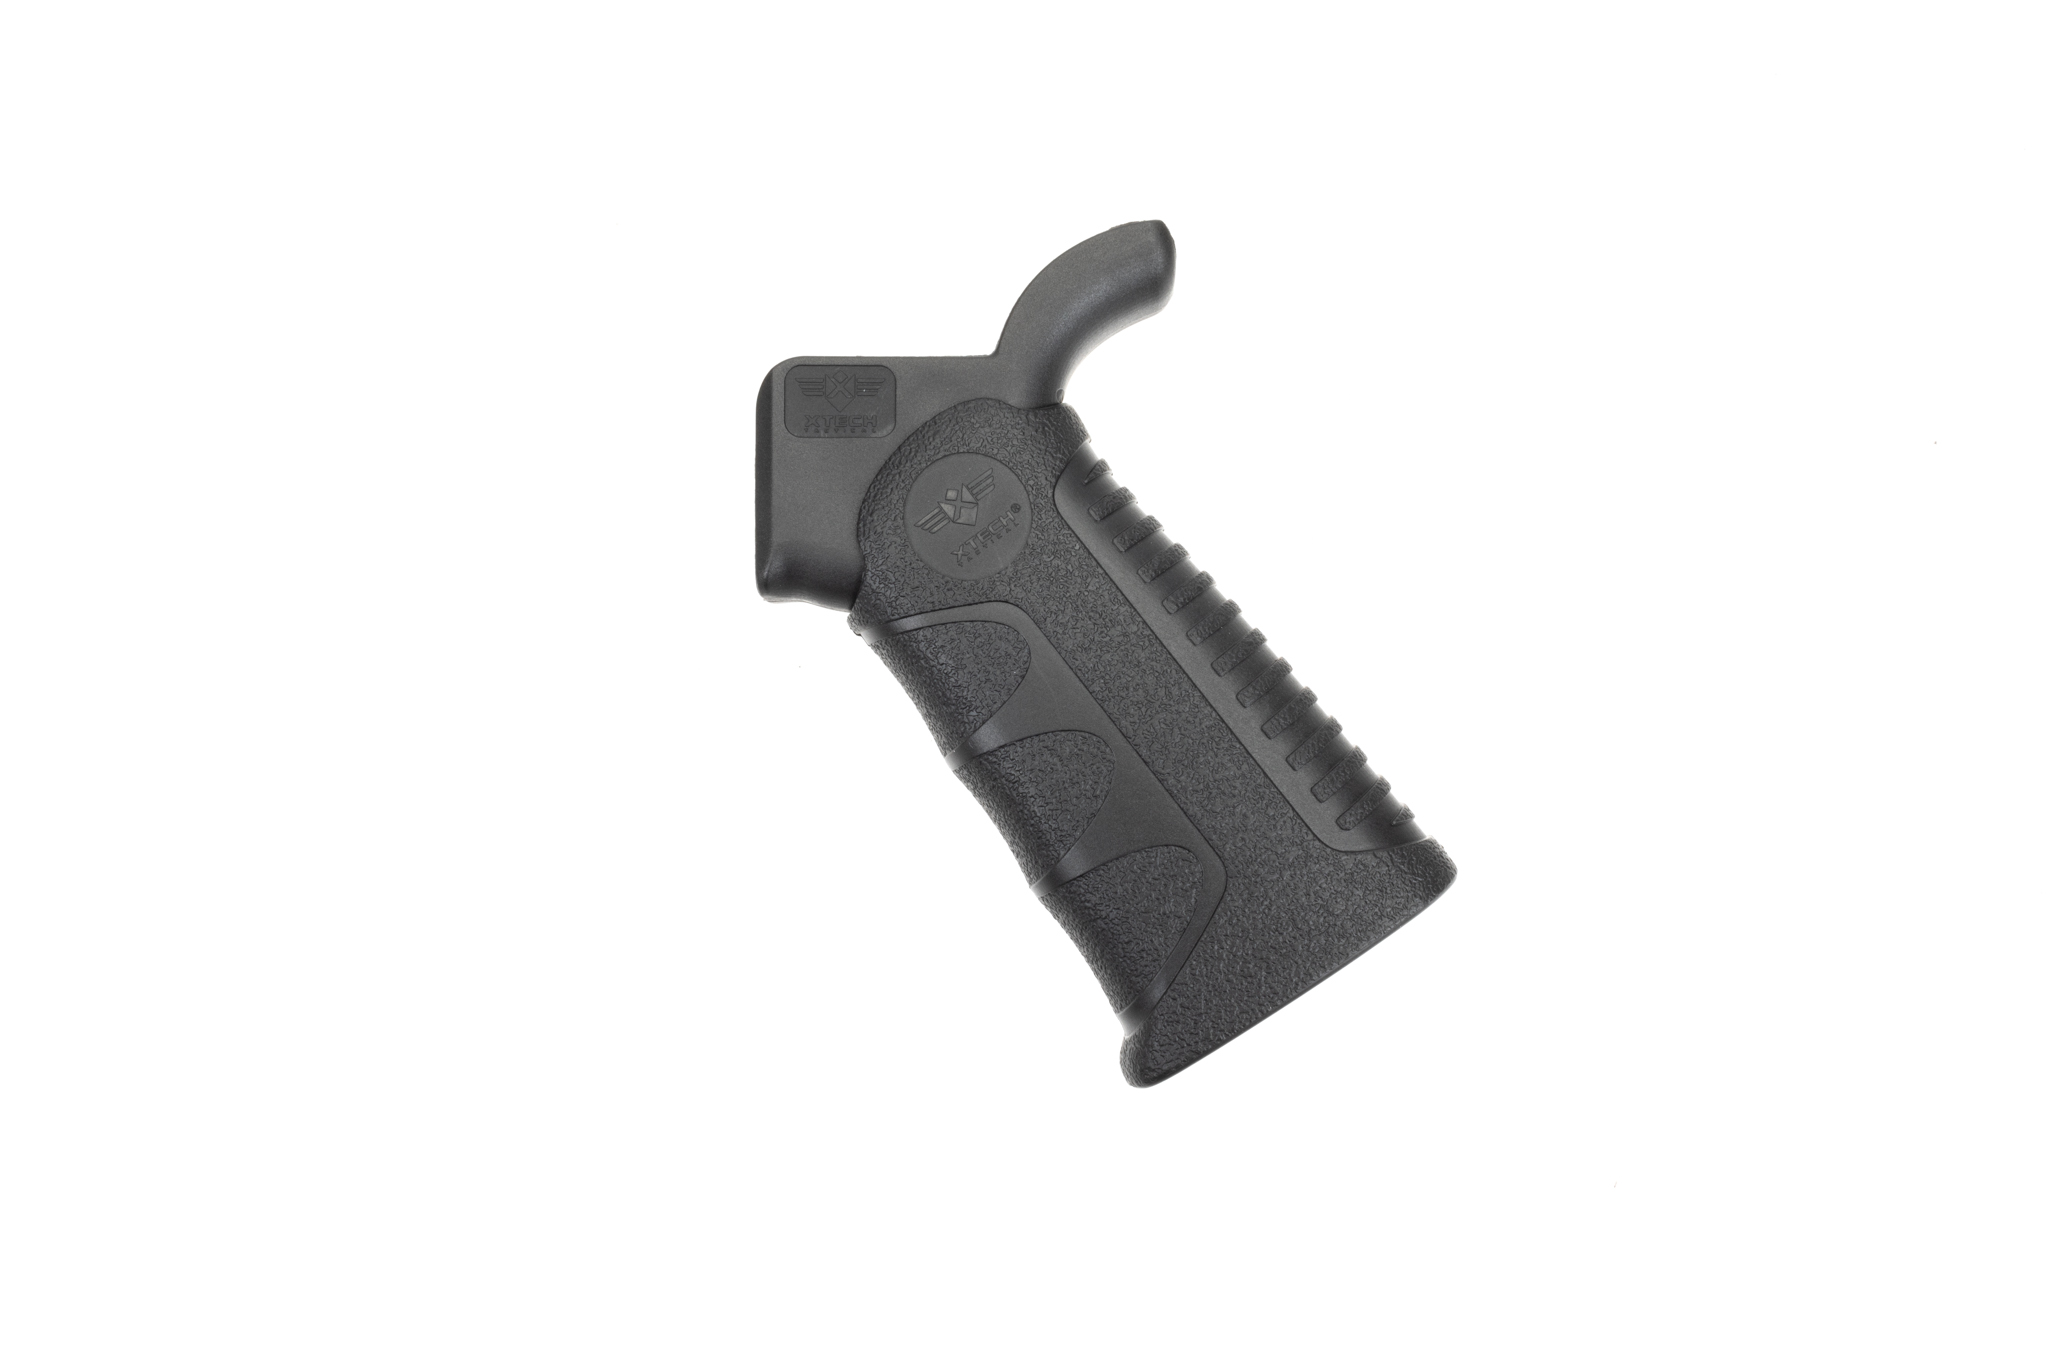 XTech Tactical Expands ATG Grip Line with Heavy Texture Grip